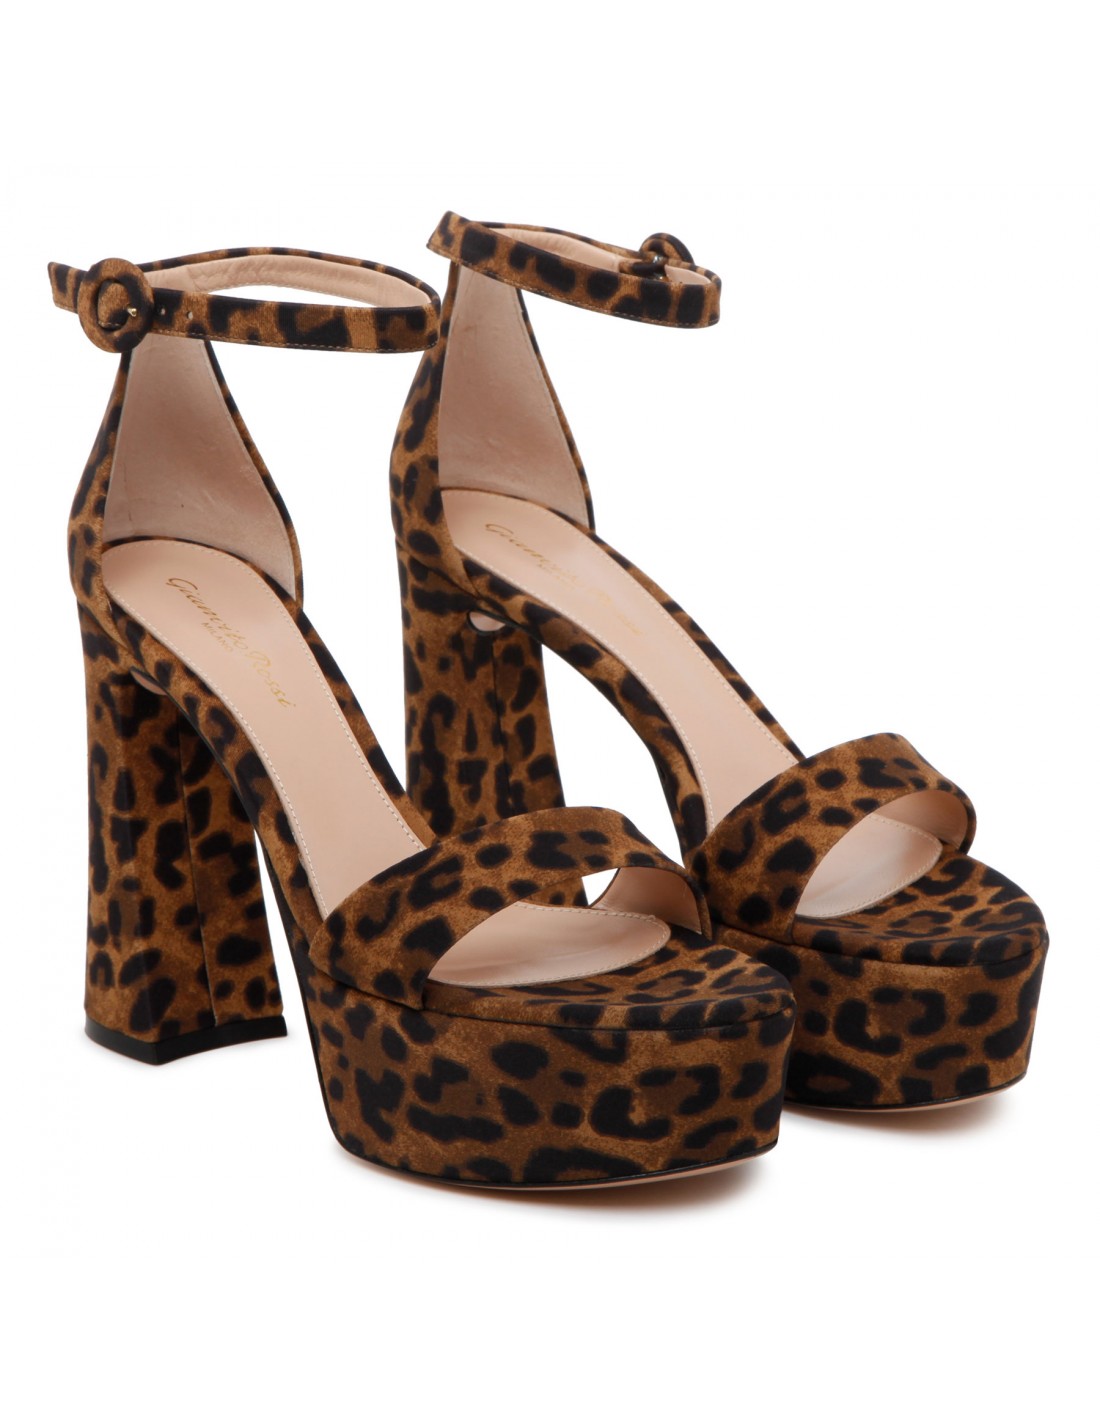 Holly leopard sandals